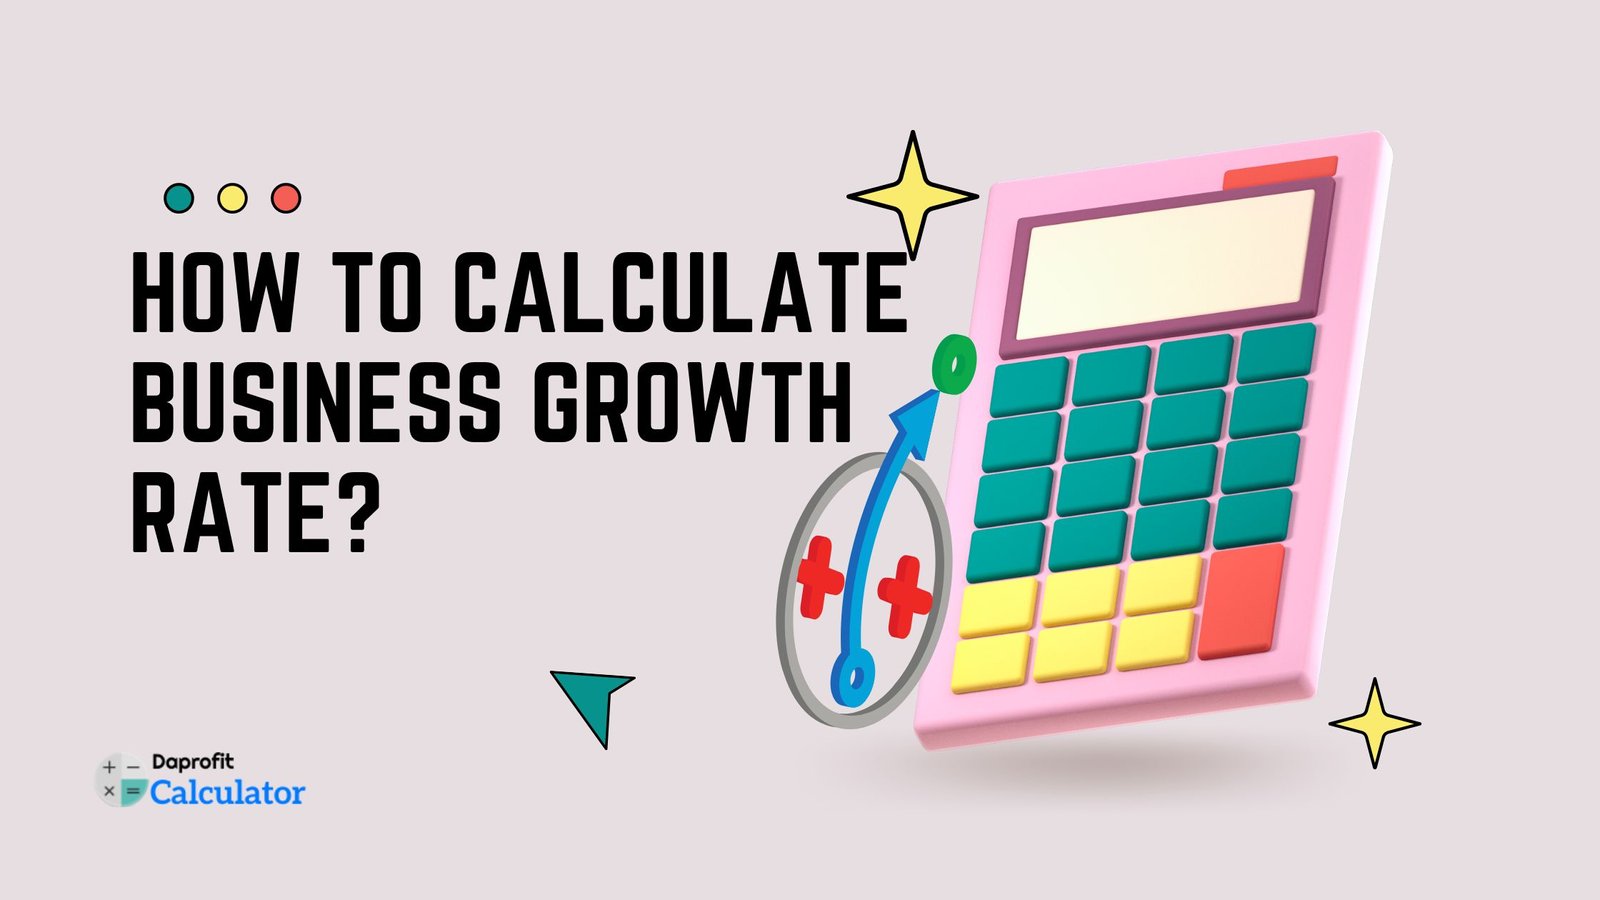 How to Calculate Business Growth Rate?